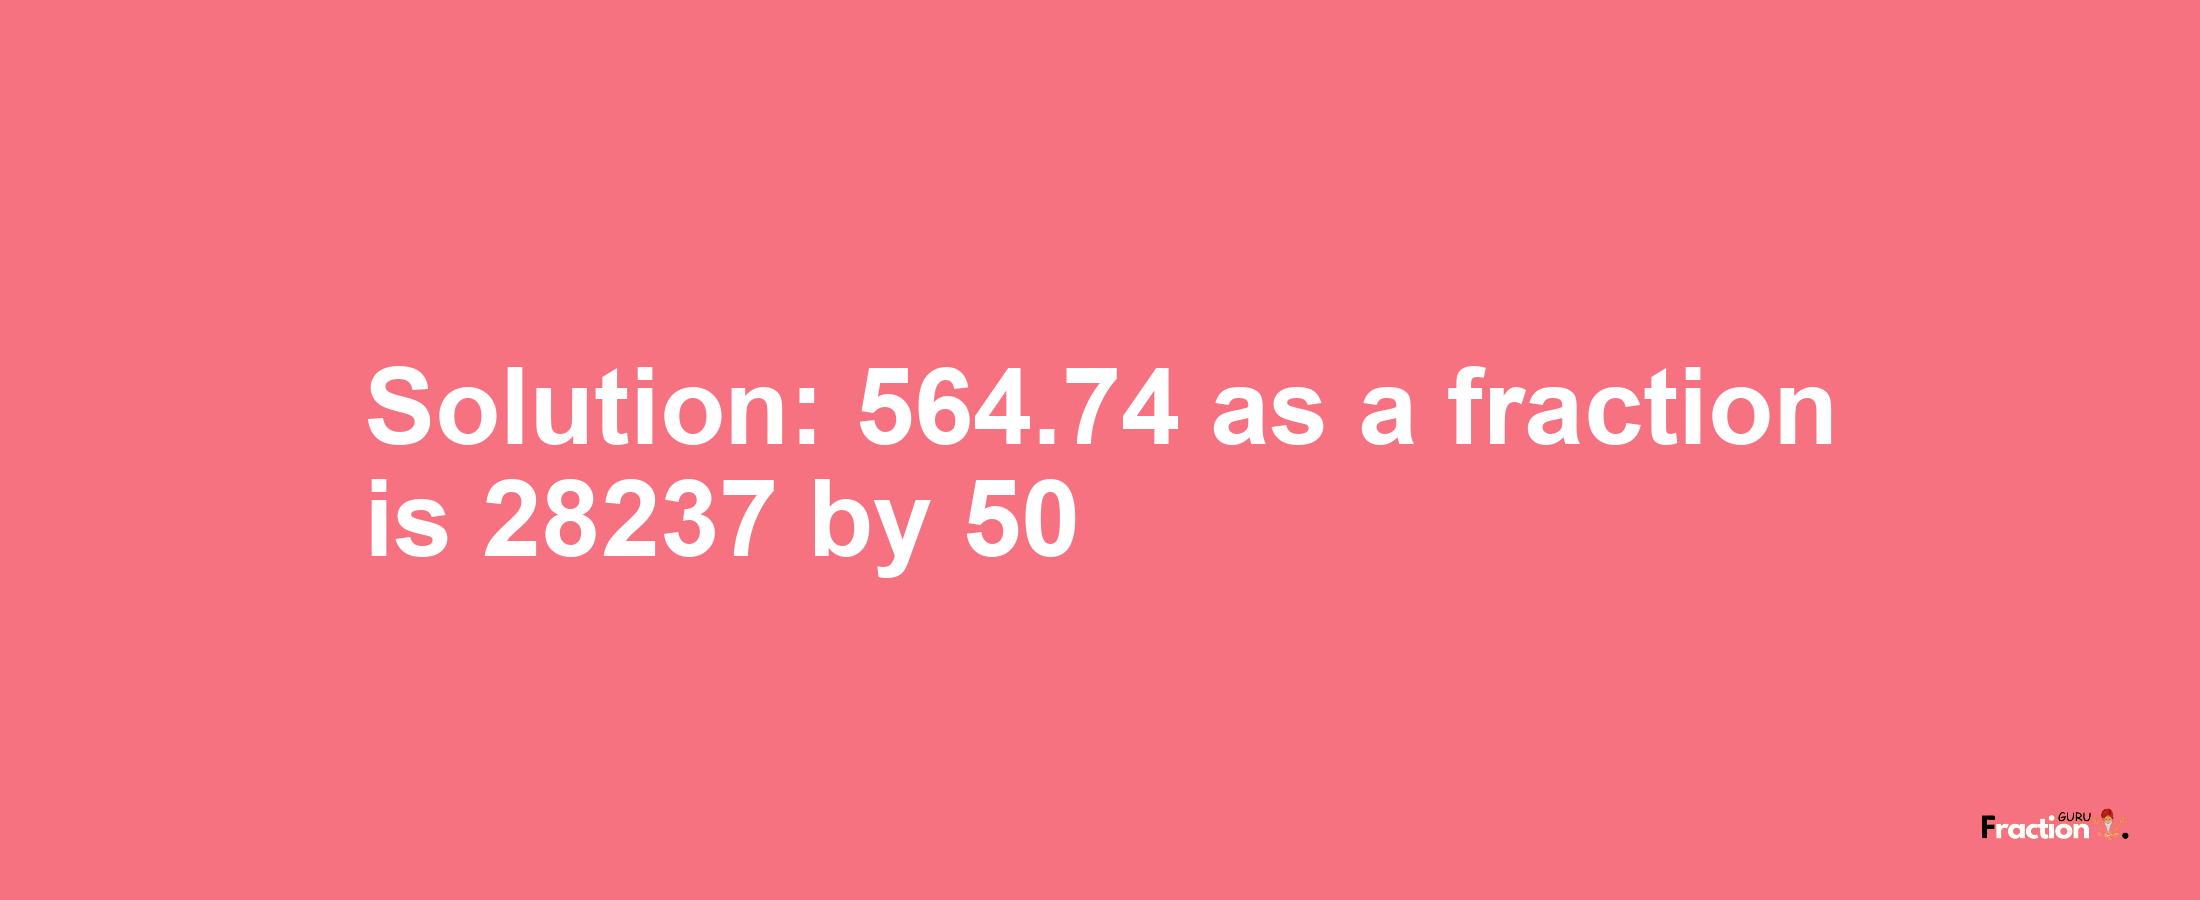 Solution:564.74 as a fraction is 28237/50